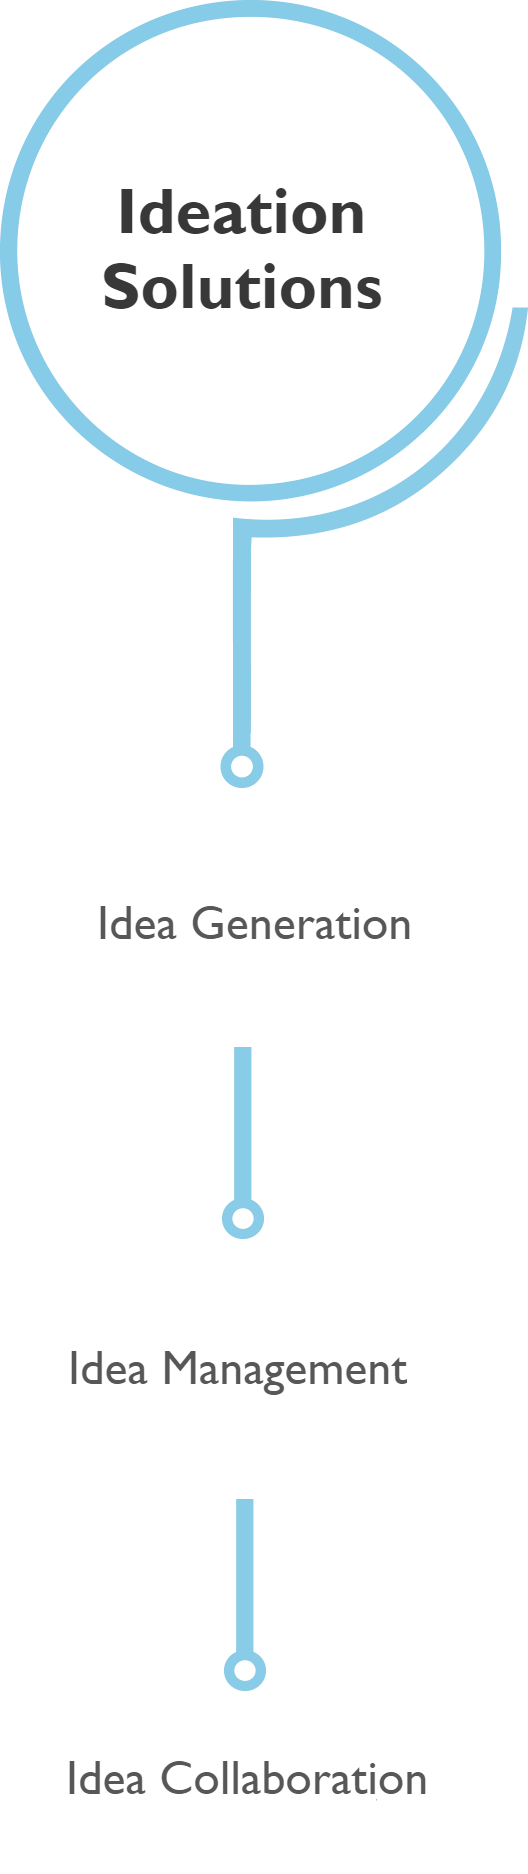 Ideation Solutions detailed services